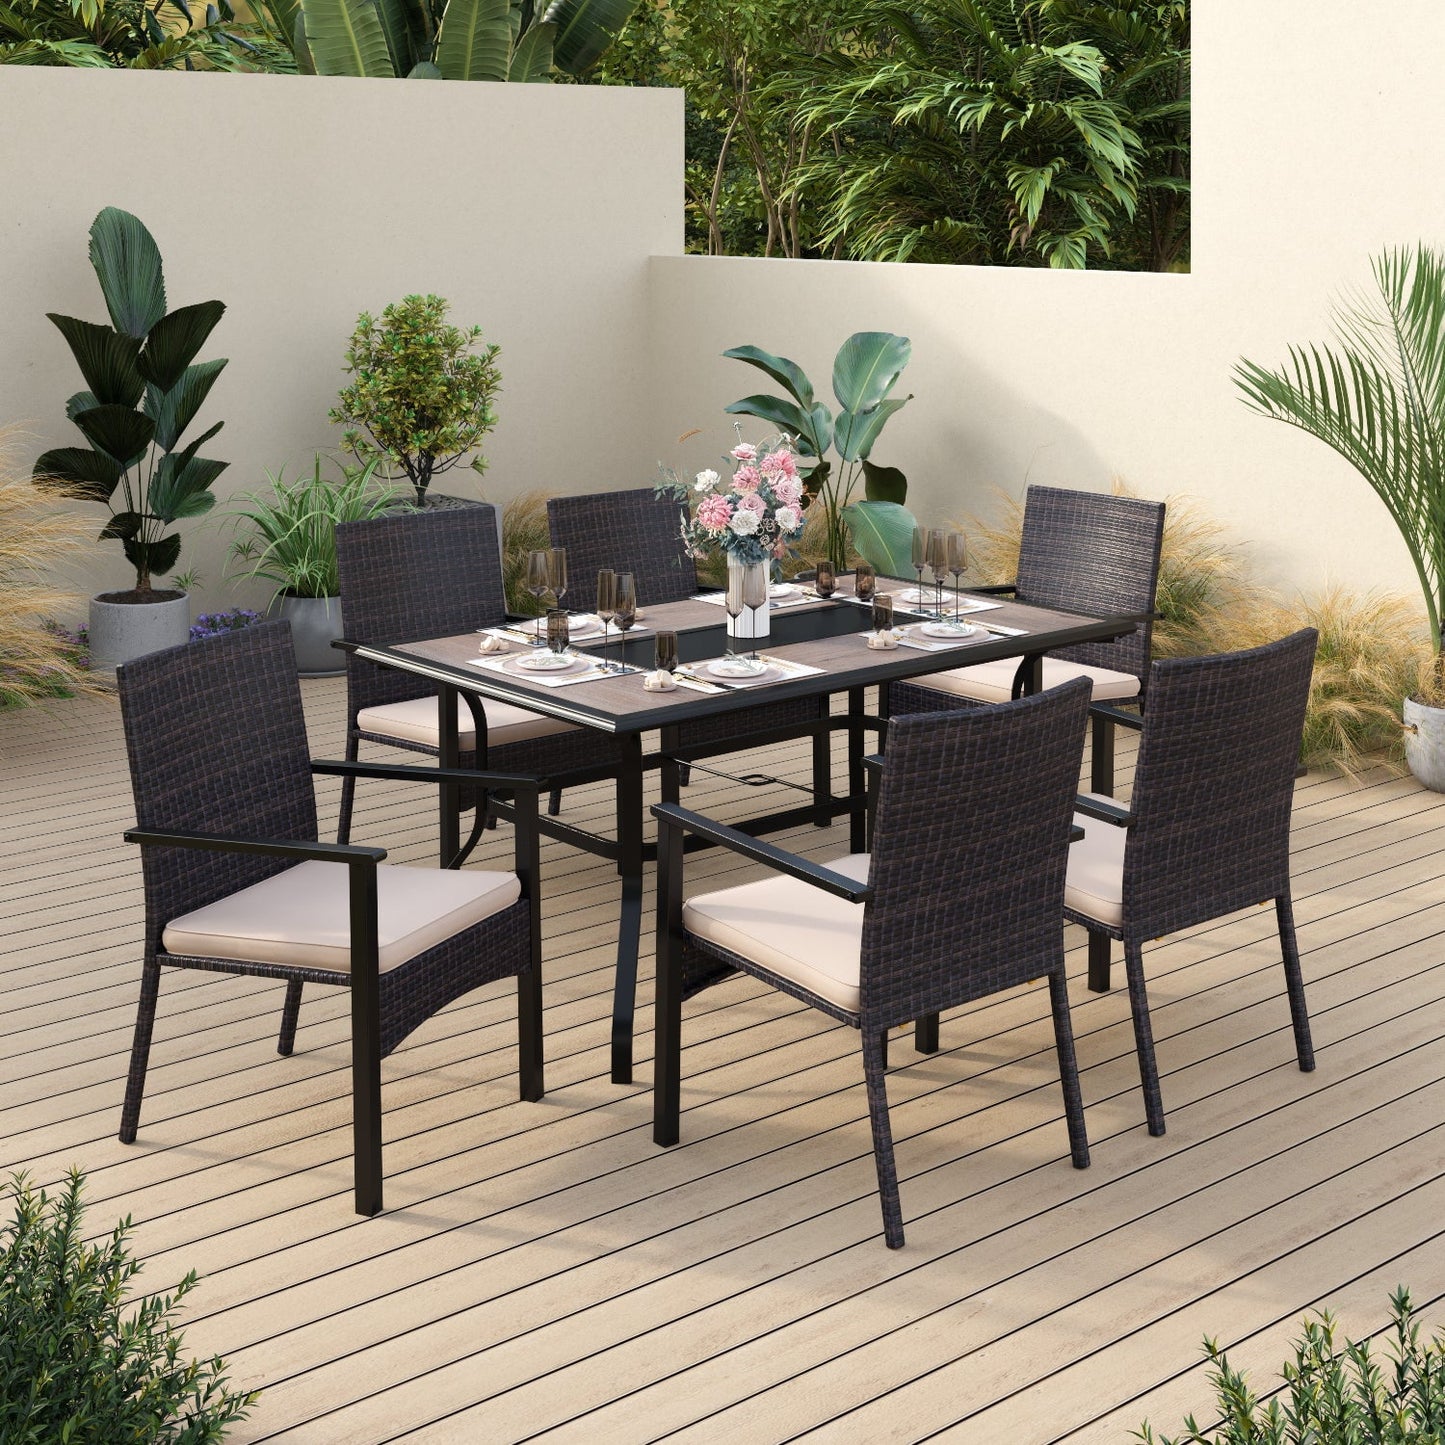 Sophia & William 7 Pieces Wicker Outdoor Patio Dining Set Chairs&Table Set